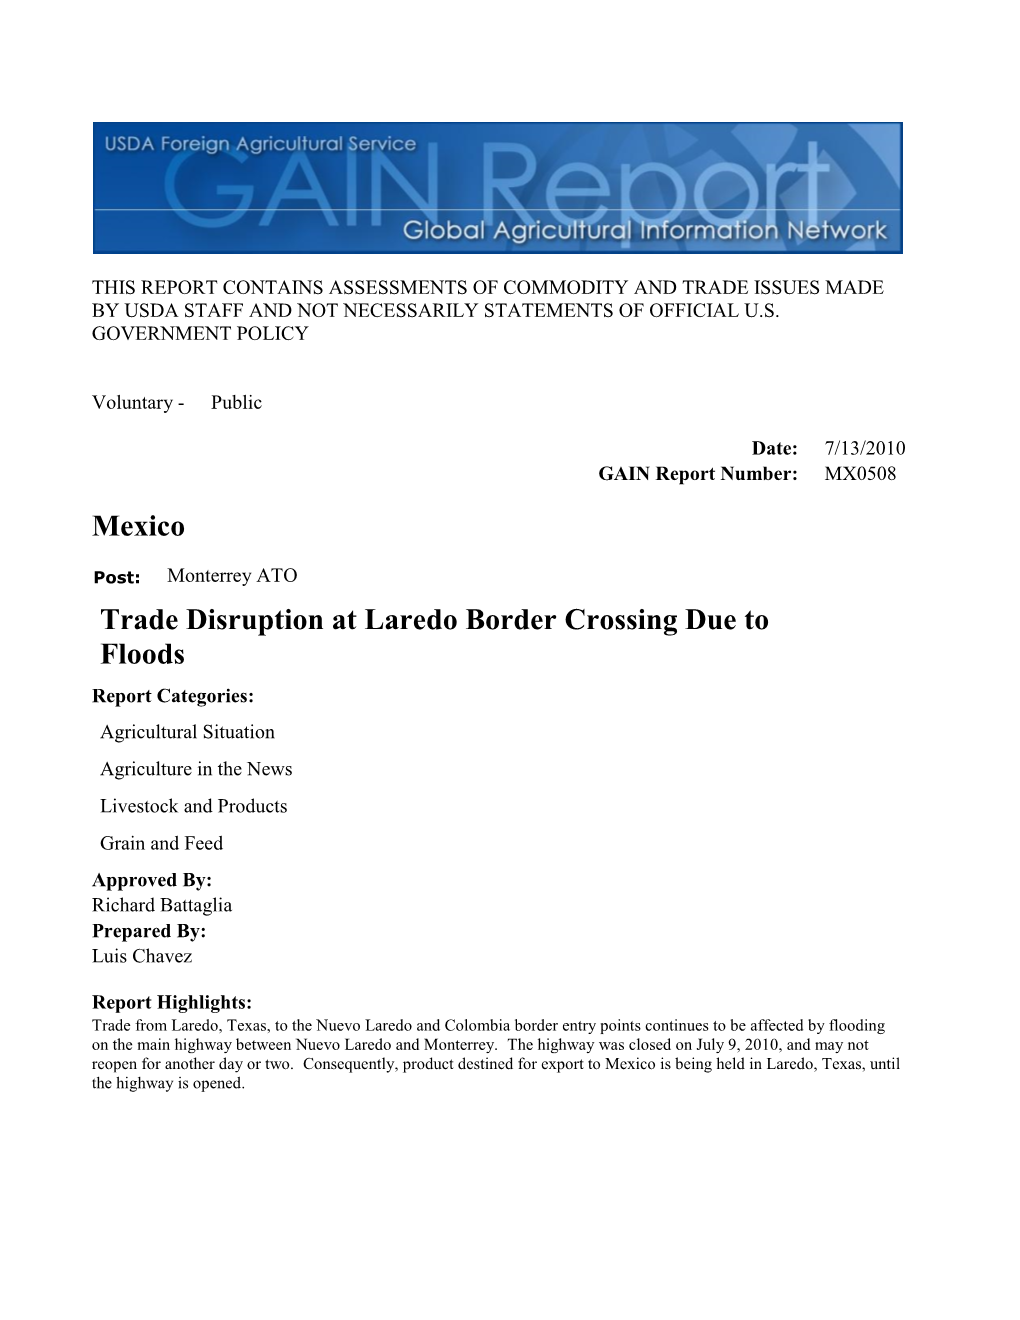 Mexico Trade Disruption at Laredo Border Crossing Due to Floods